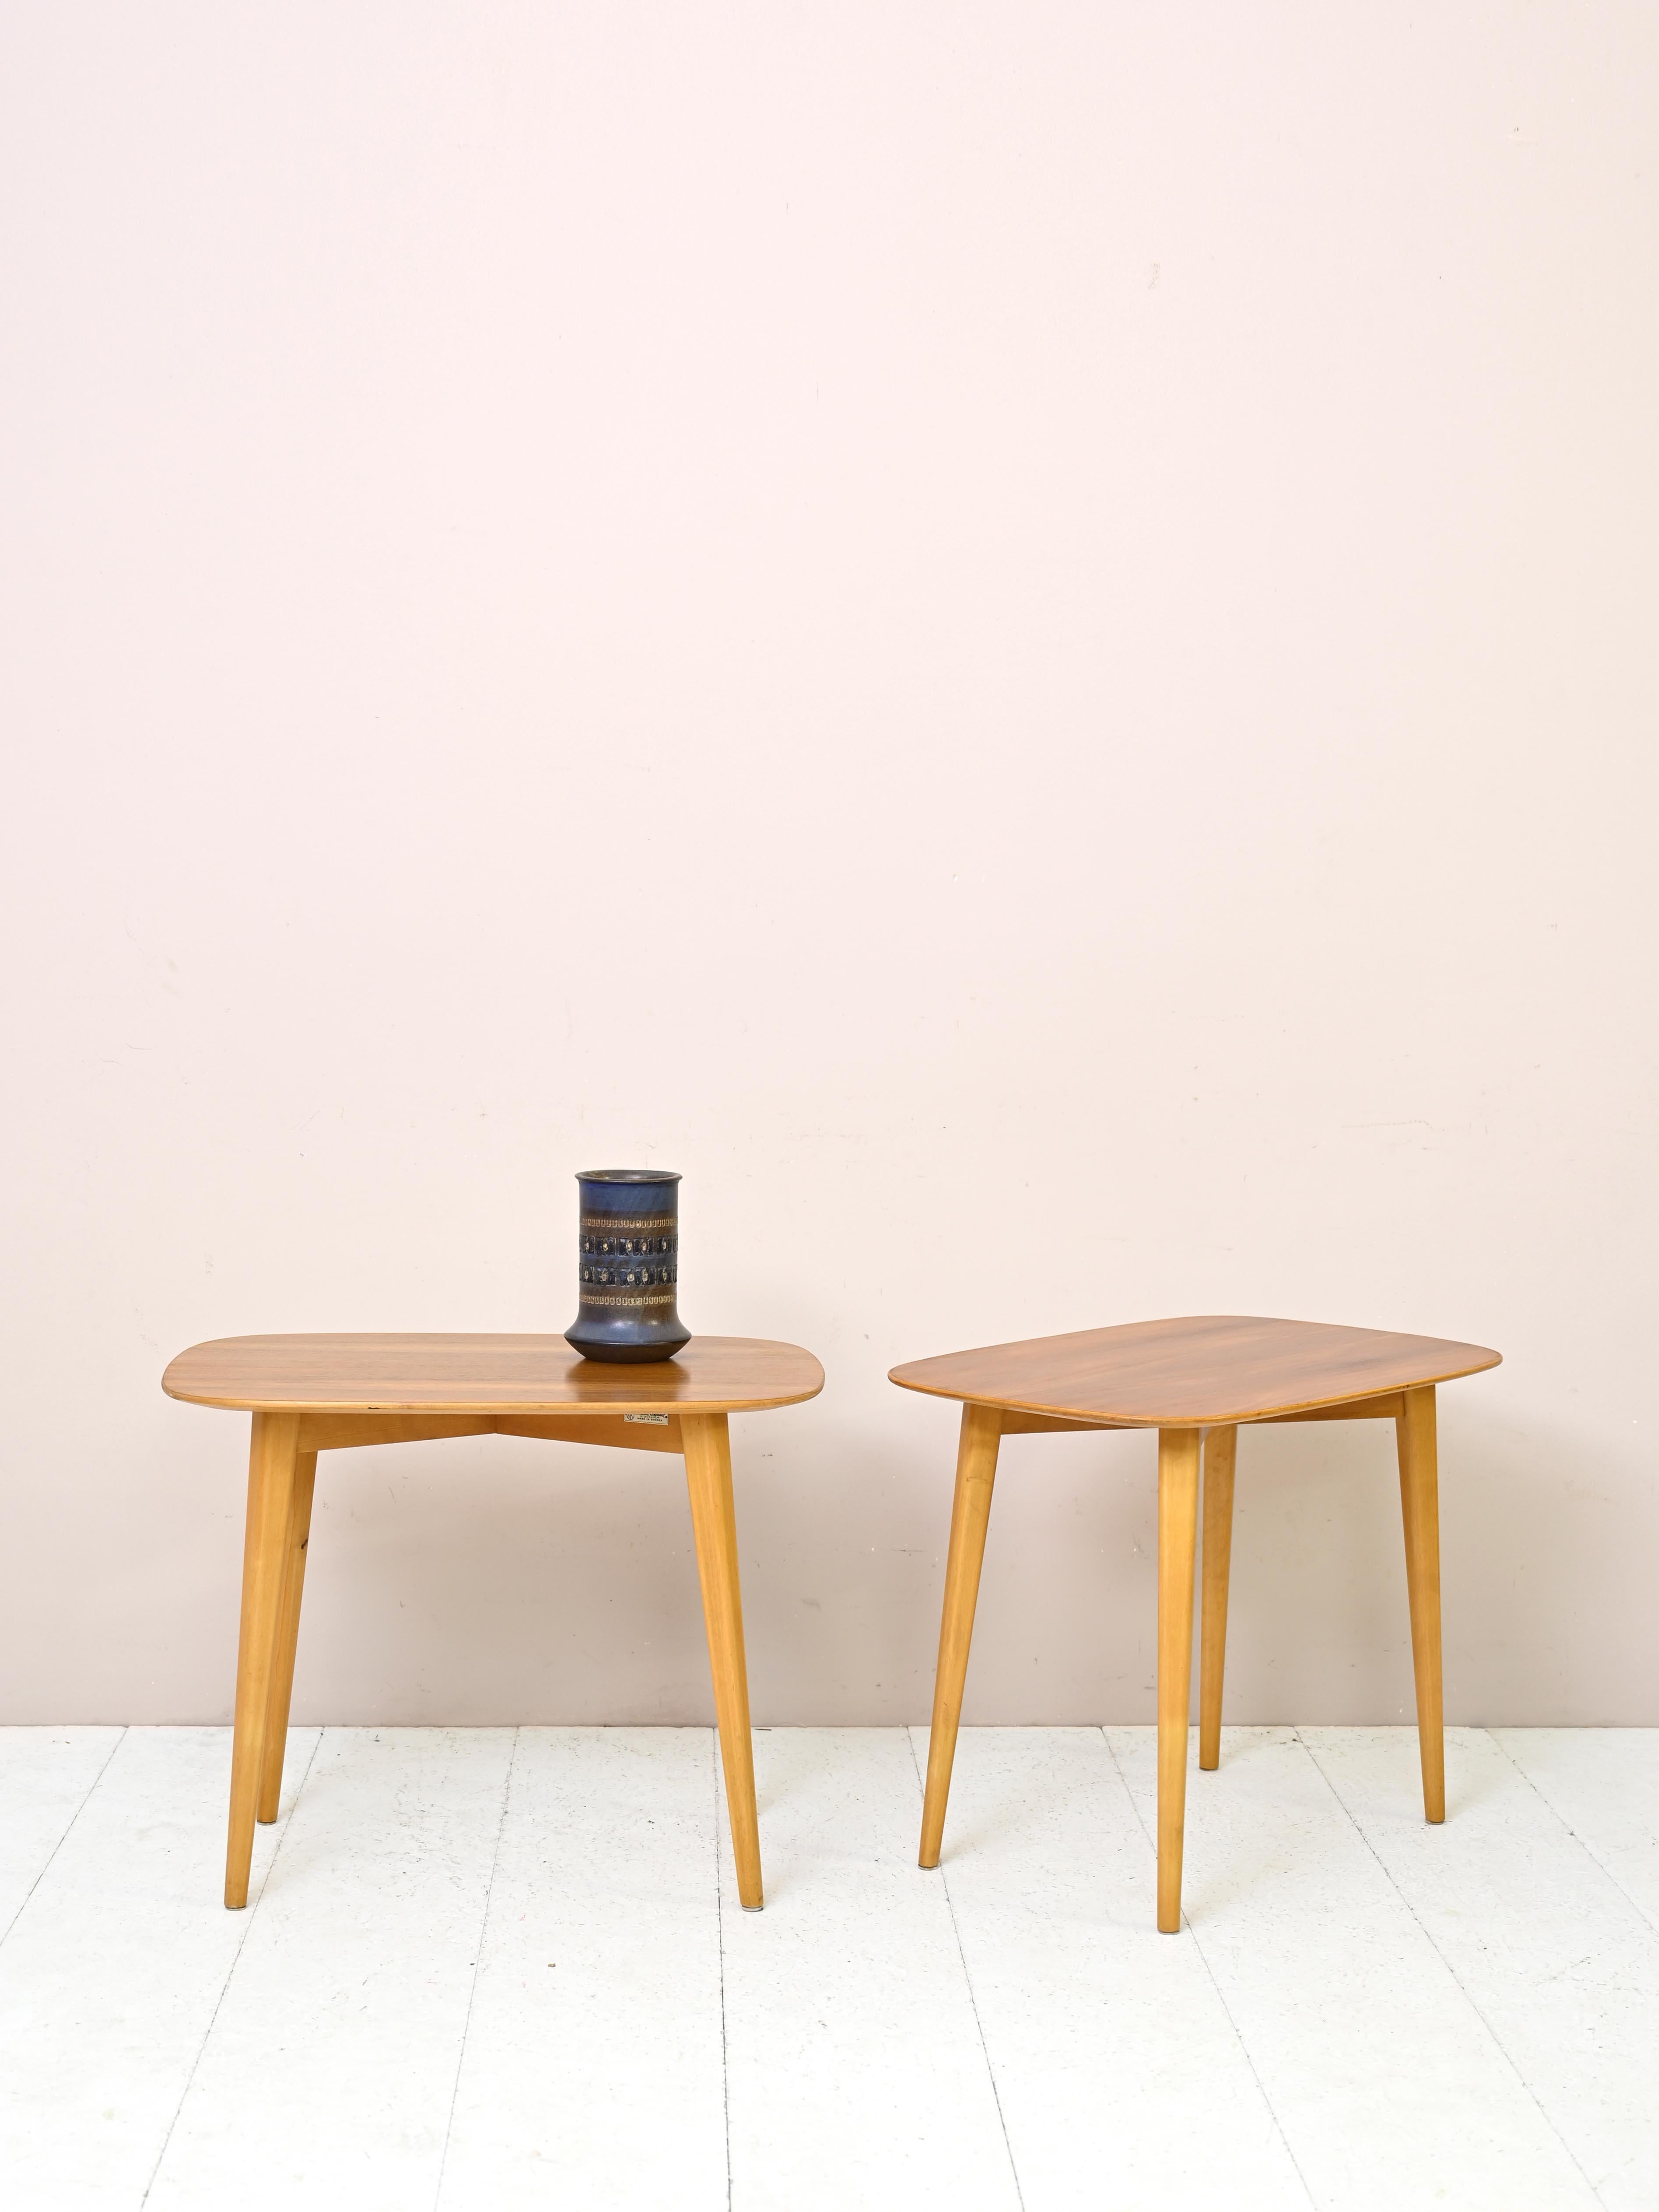 Pair of vintage wooden side tables.

These sofa tables feature a simple top with rounded corners and an exposed X-shaped frame from which tapered legs depart.
The elegant and minimal lines make them suitable for placement in already furnished